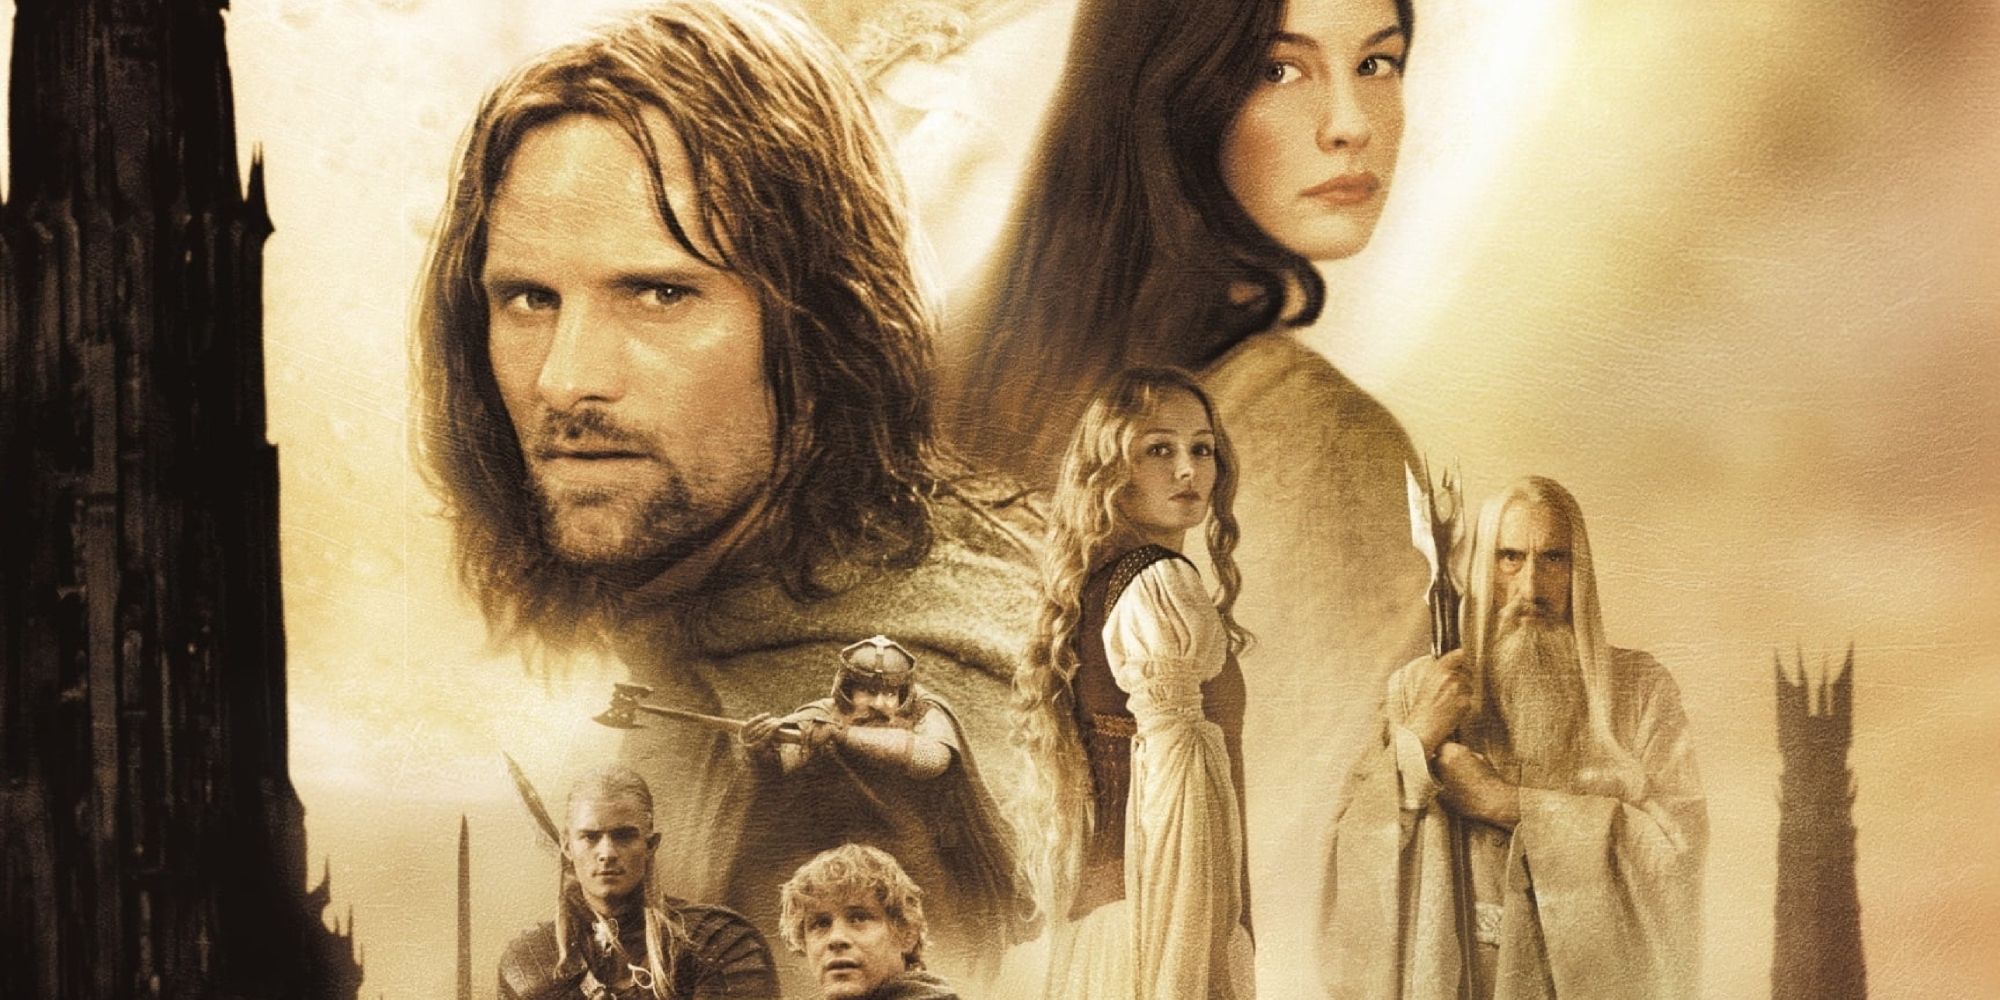 A close-up of Lord of the Ring's The Two Towers poster, which includes Aragorn and Arwen